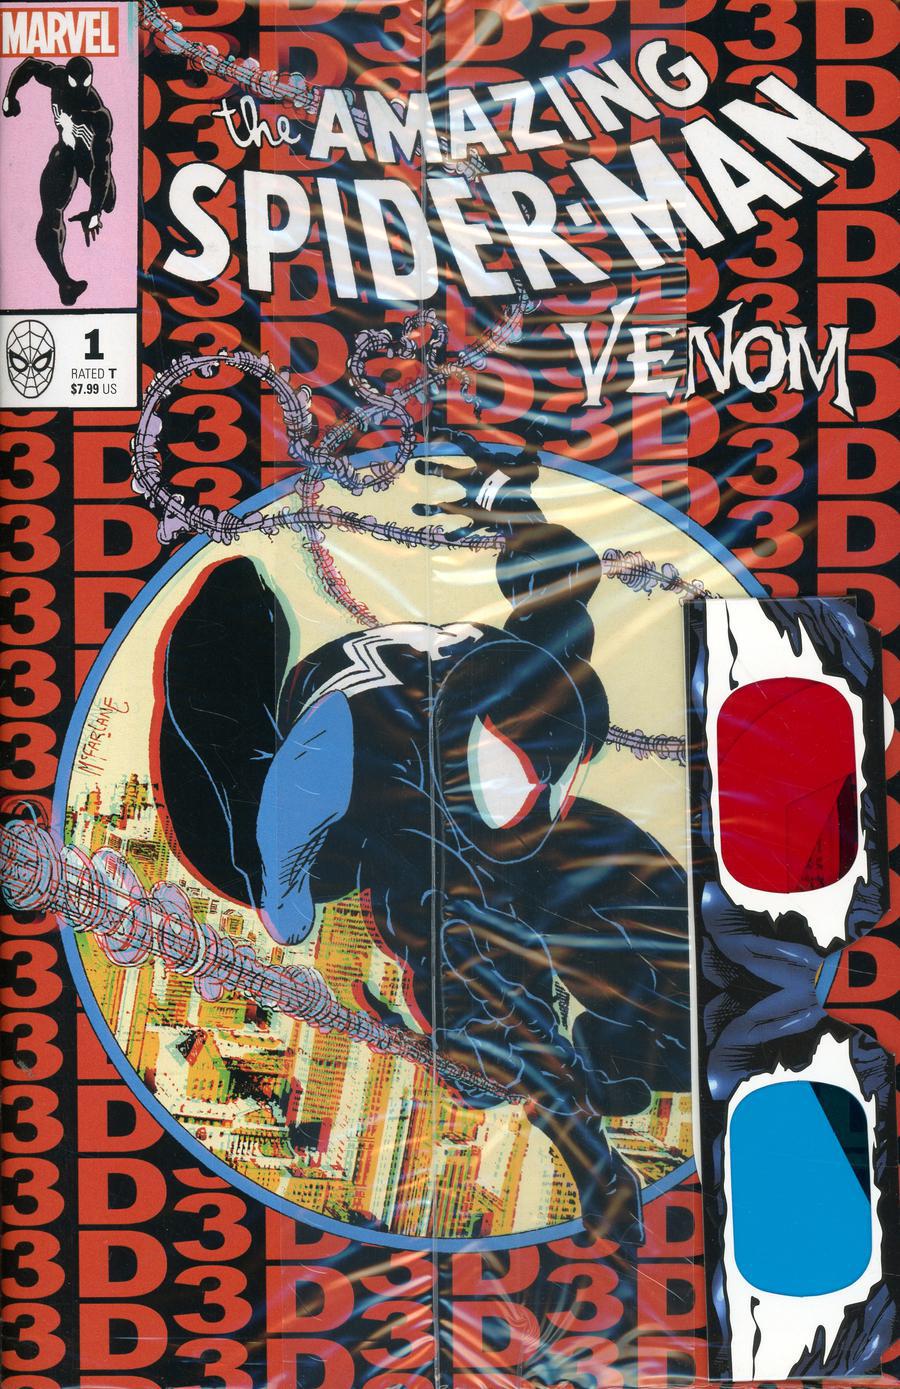 Amazing Spider-Man Venom 3D #1 Cover B Without Polybag